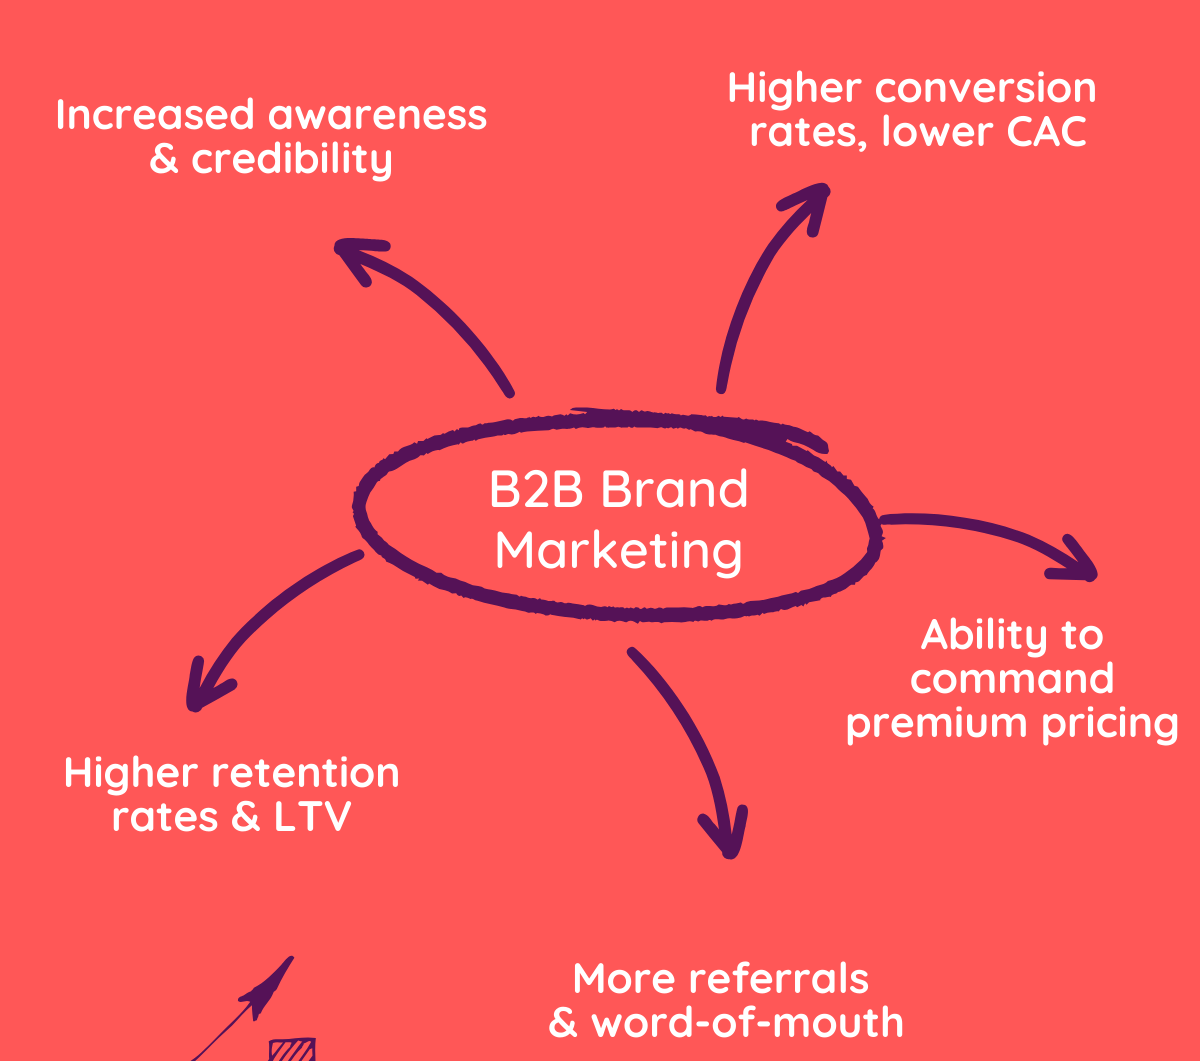 Main Image: B2B marketing in the center and its values around it